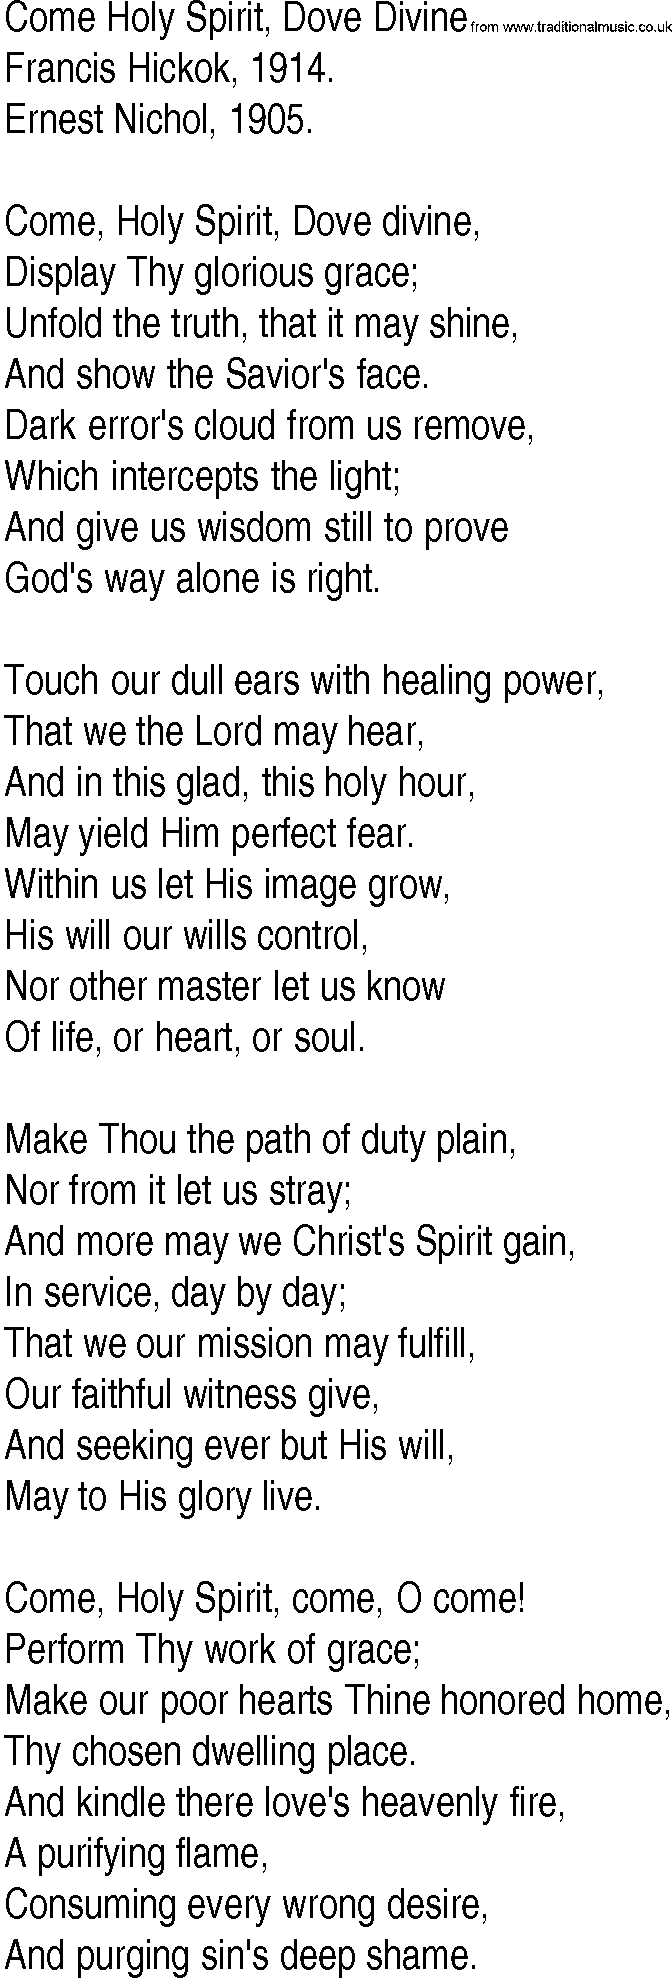 Hymn and Gospel Song: Come Holy Spirit, Dove Divine by Francis Hickok lyrics